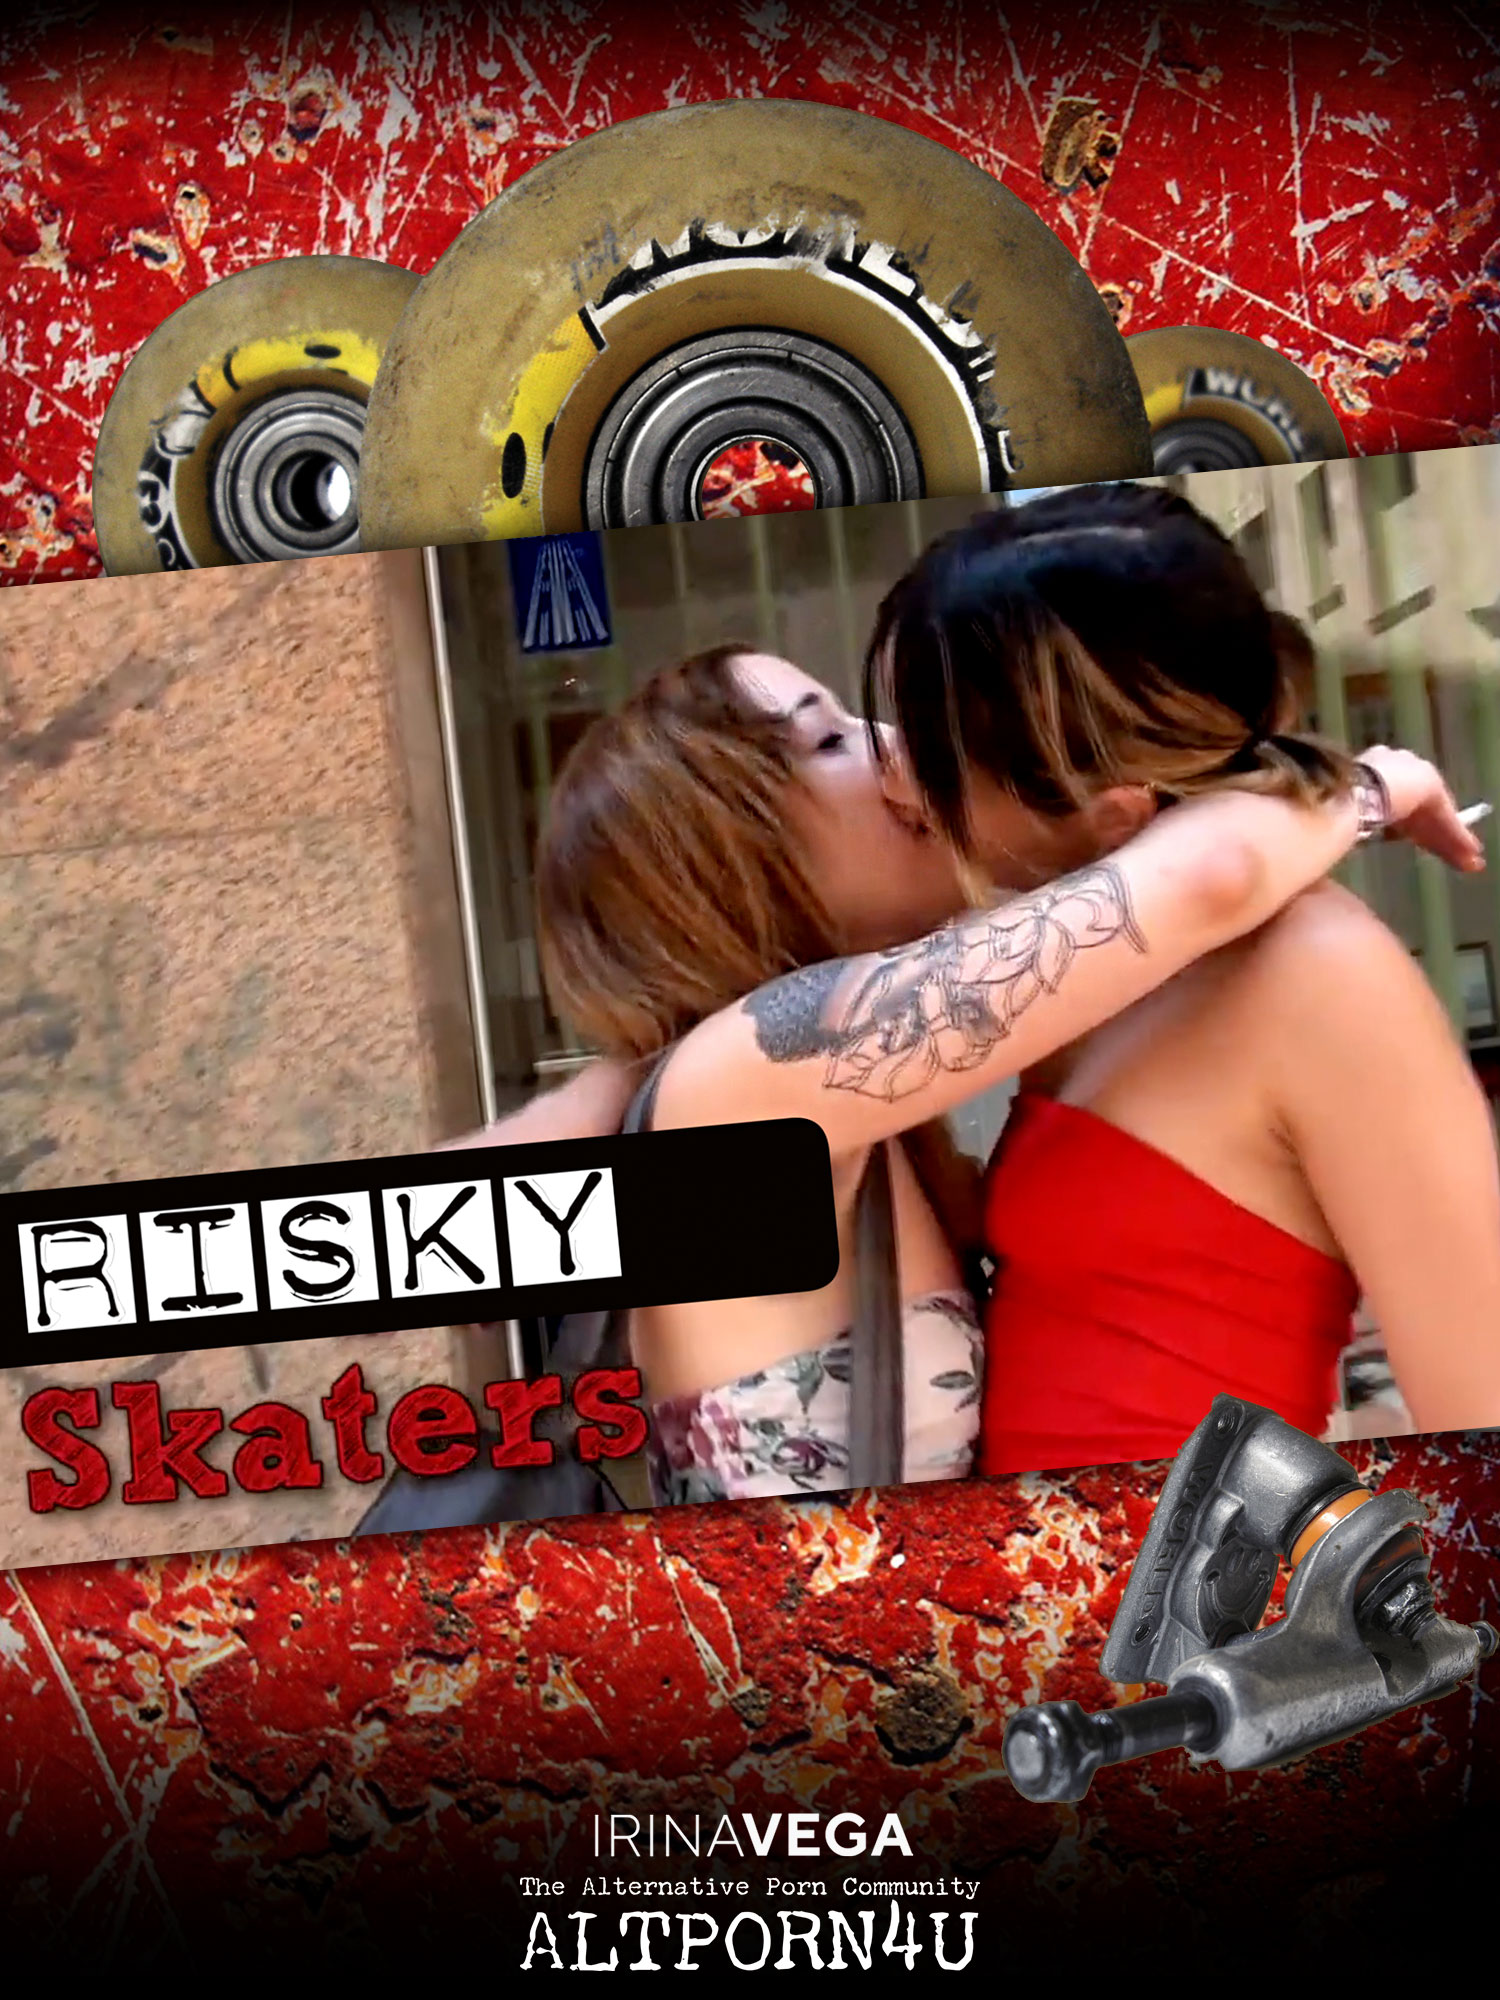 Risky Skaters with Zoe Nil and Dulce Mariposa